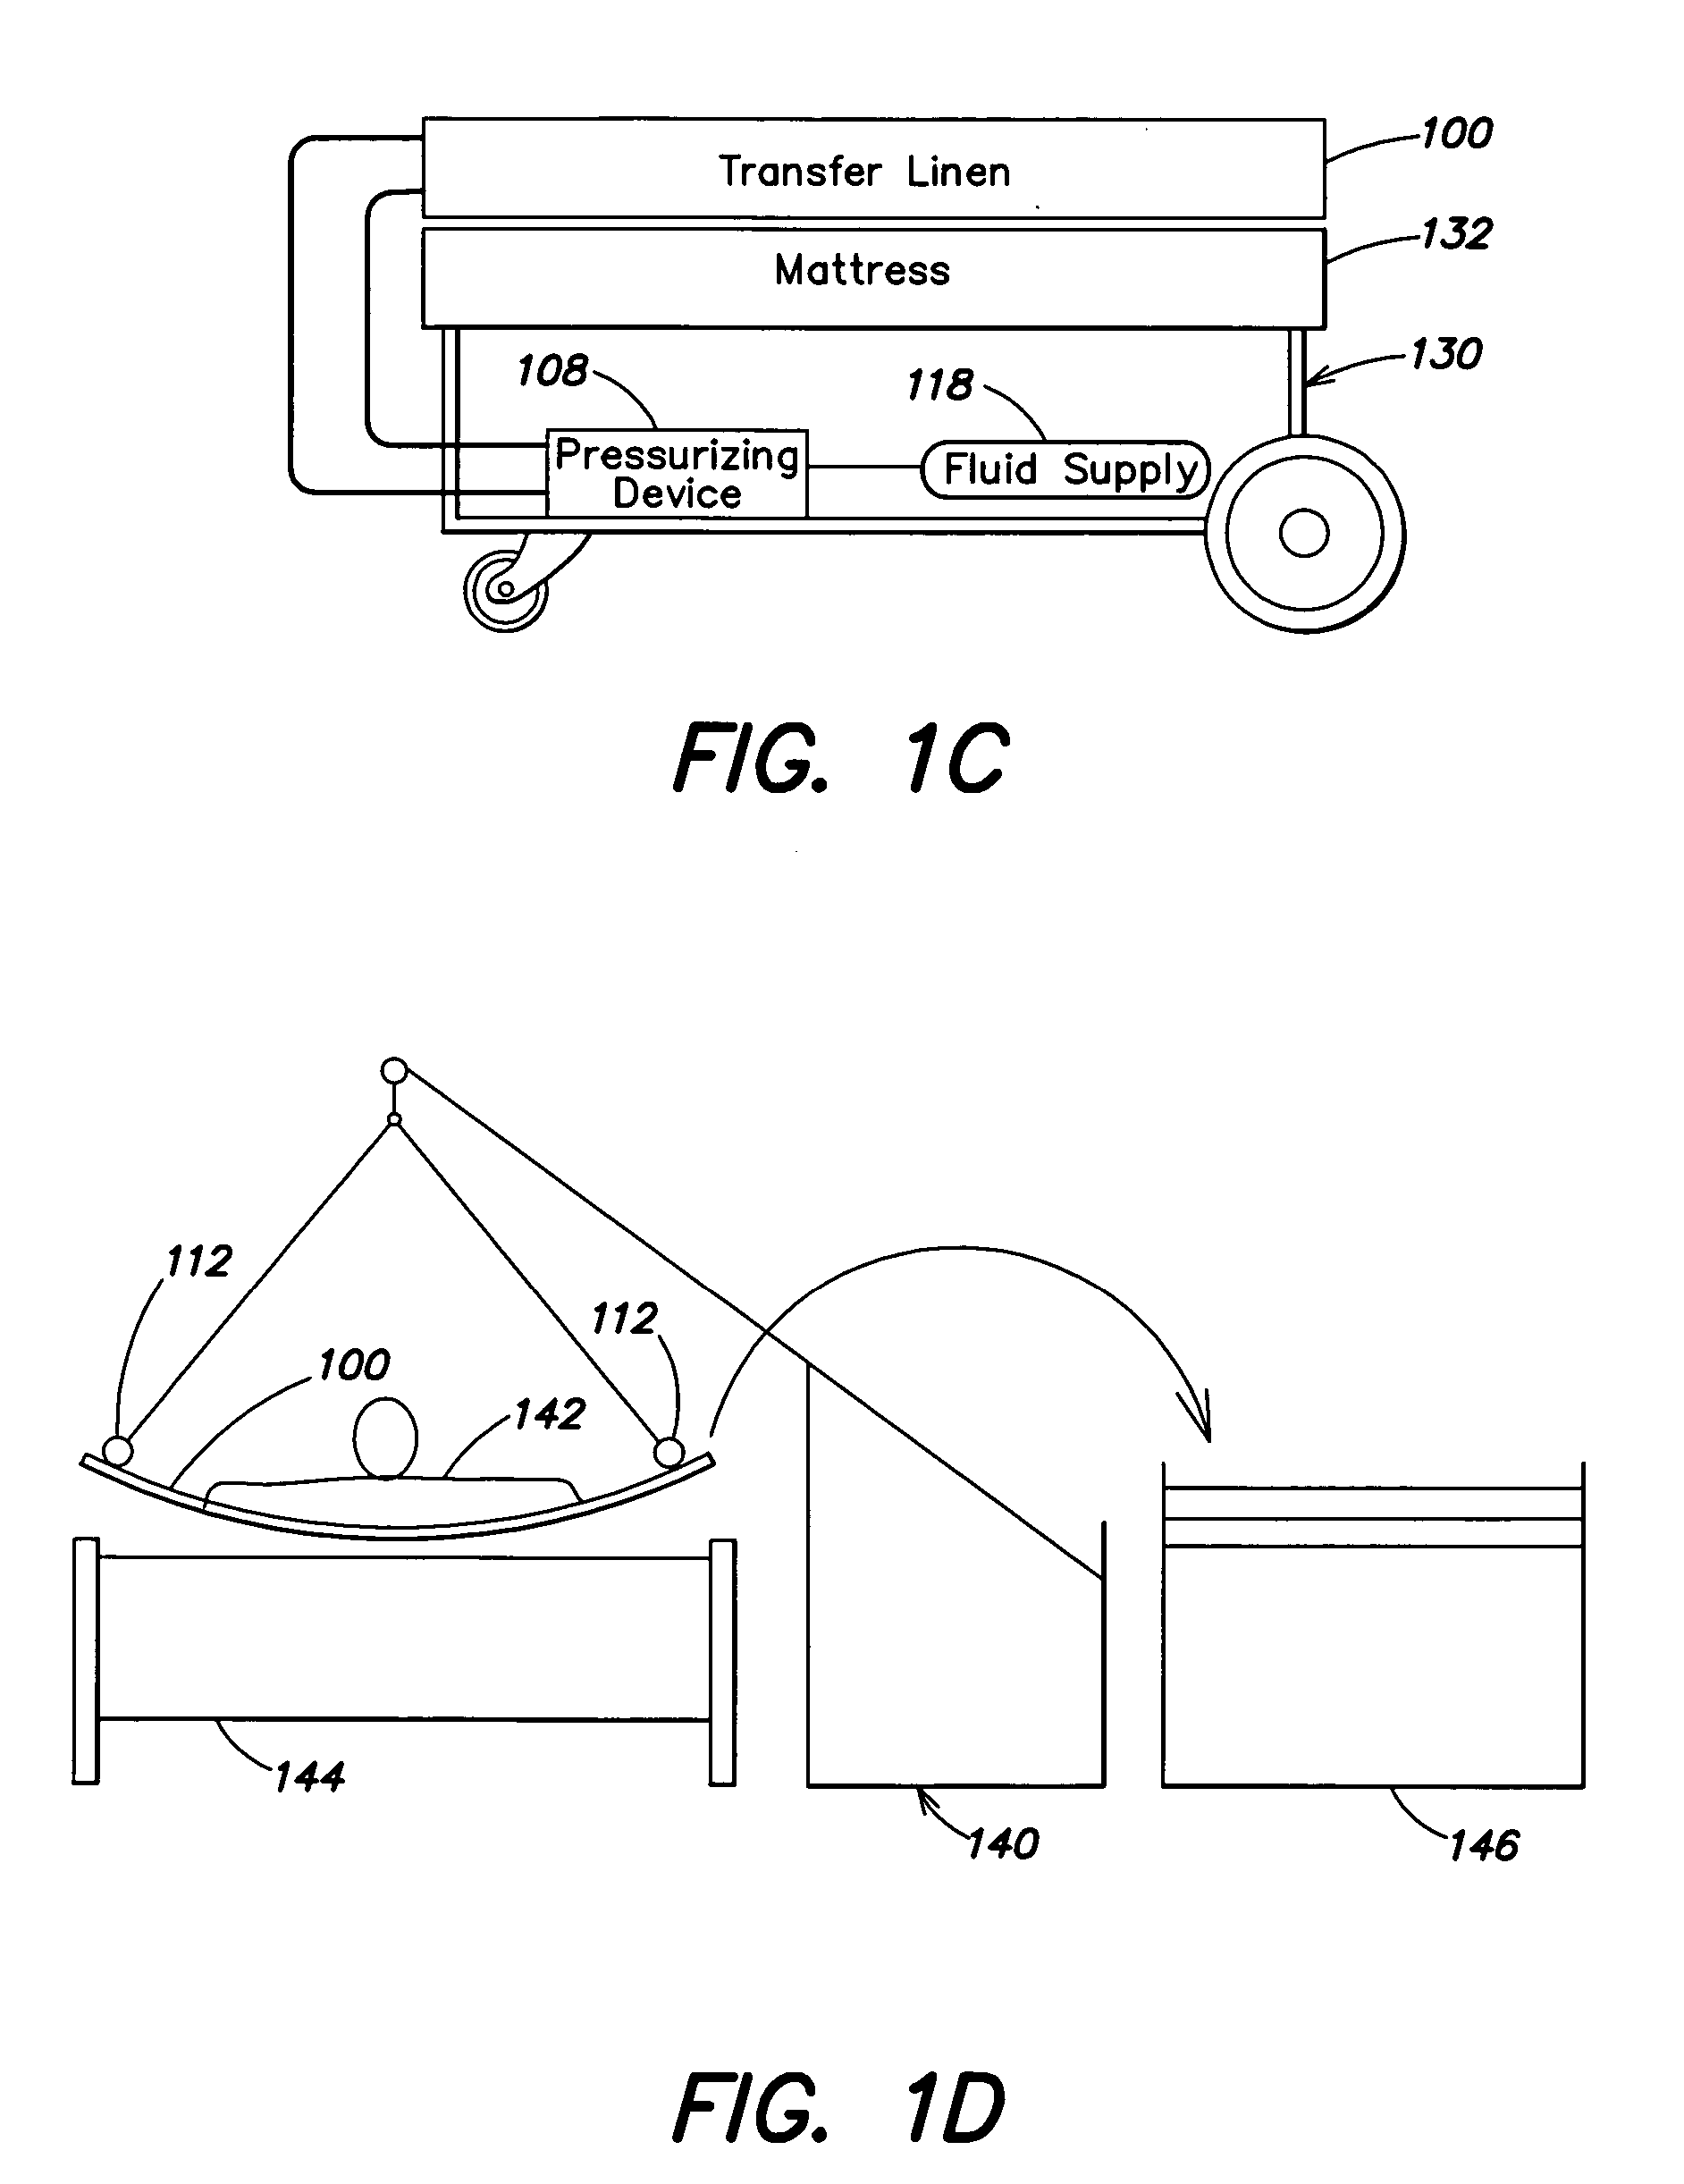 Apparatus and methods for preventing pressure ulcers in bedfast patients